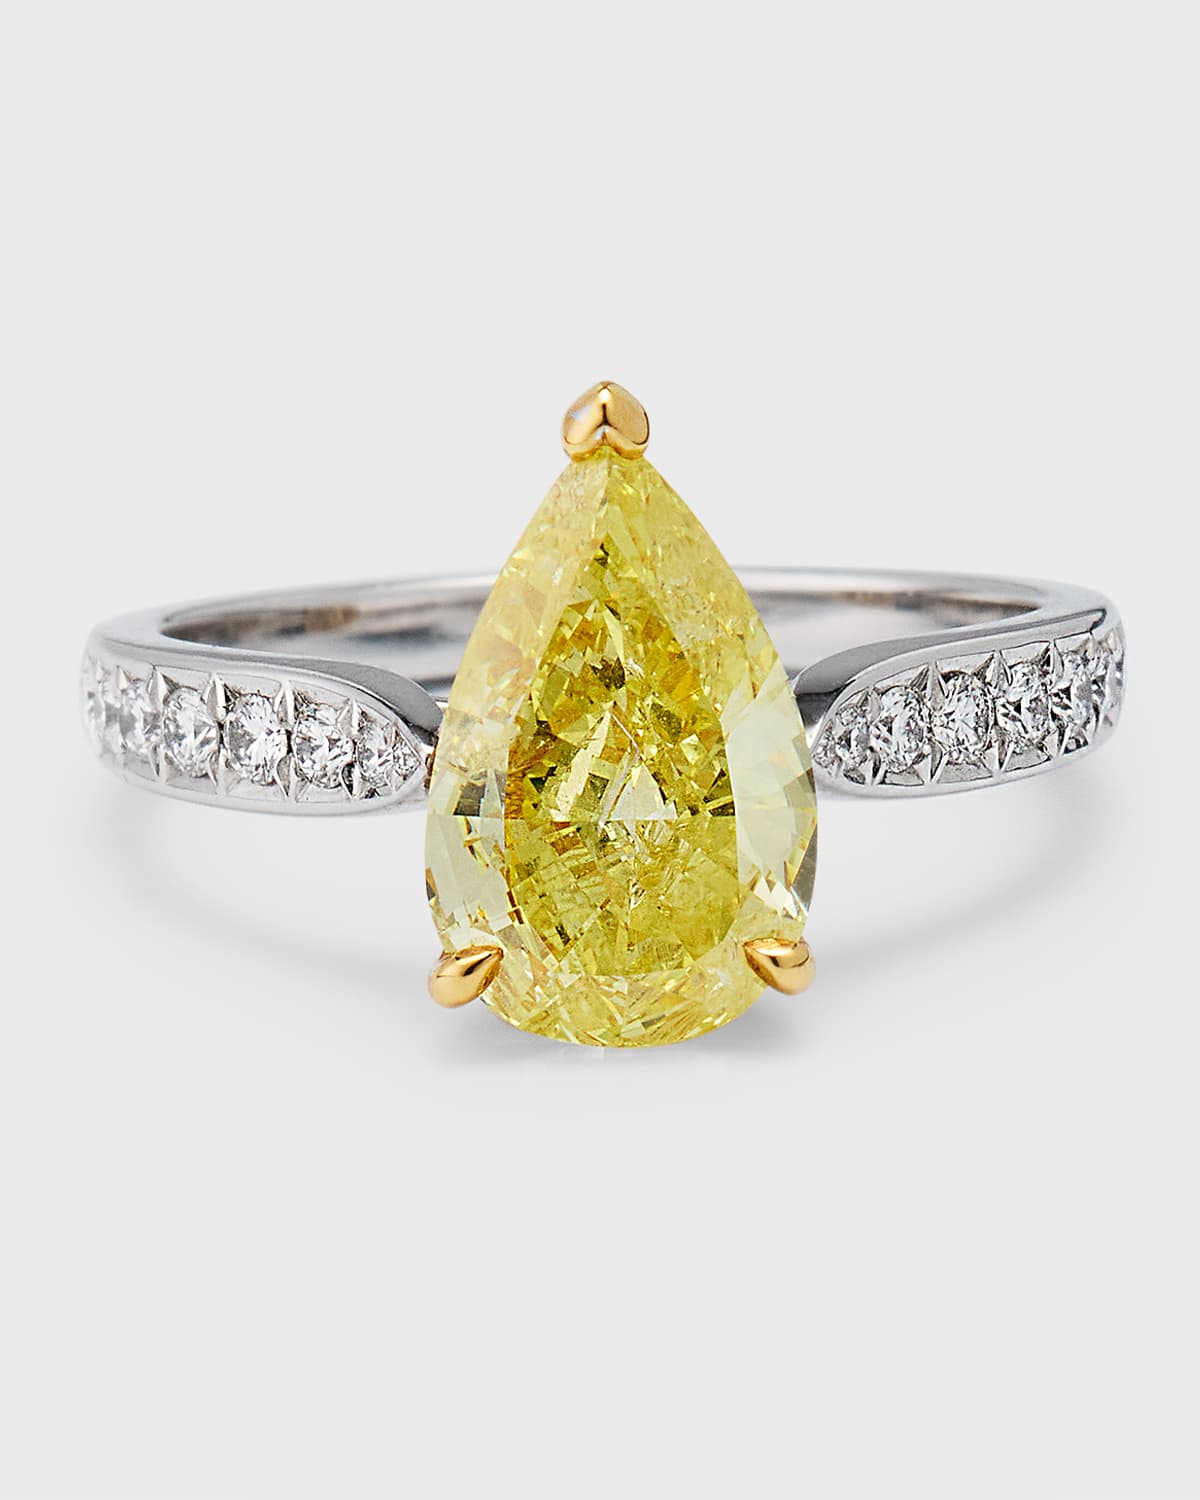 High Jewelry 18K White Gold One-of-a-Kind Yellow Diamond Solitaire Ring, EU 53 / US 6.25